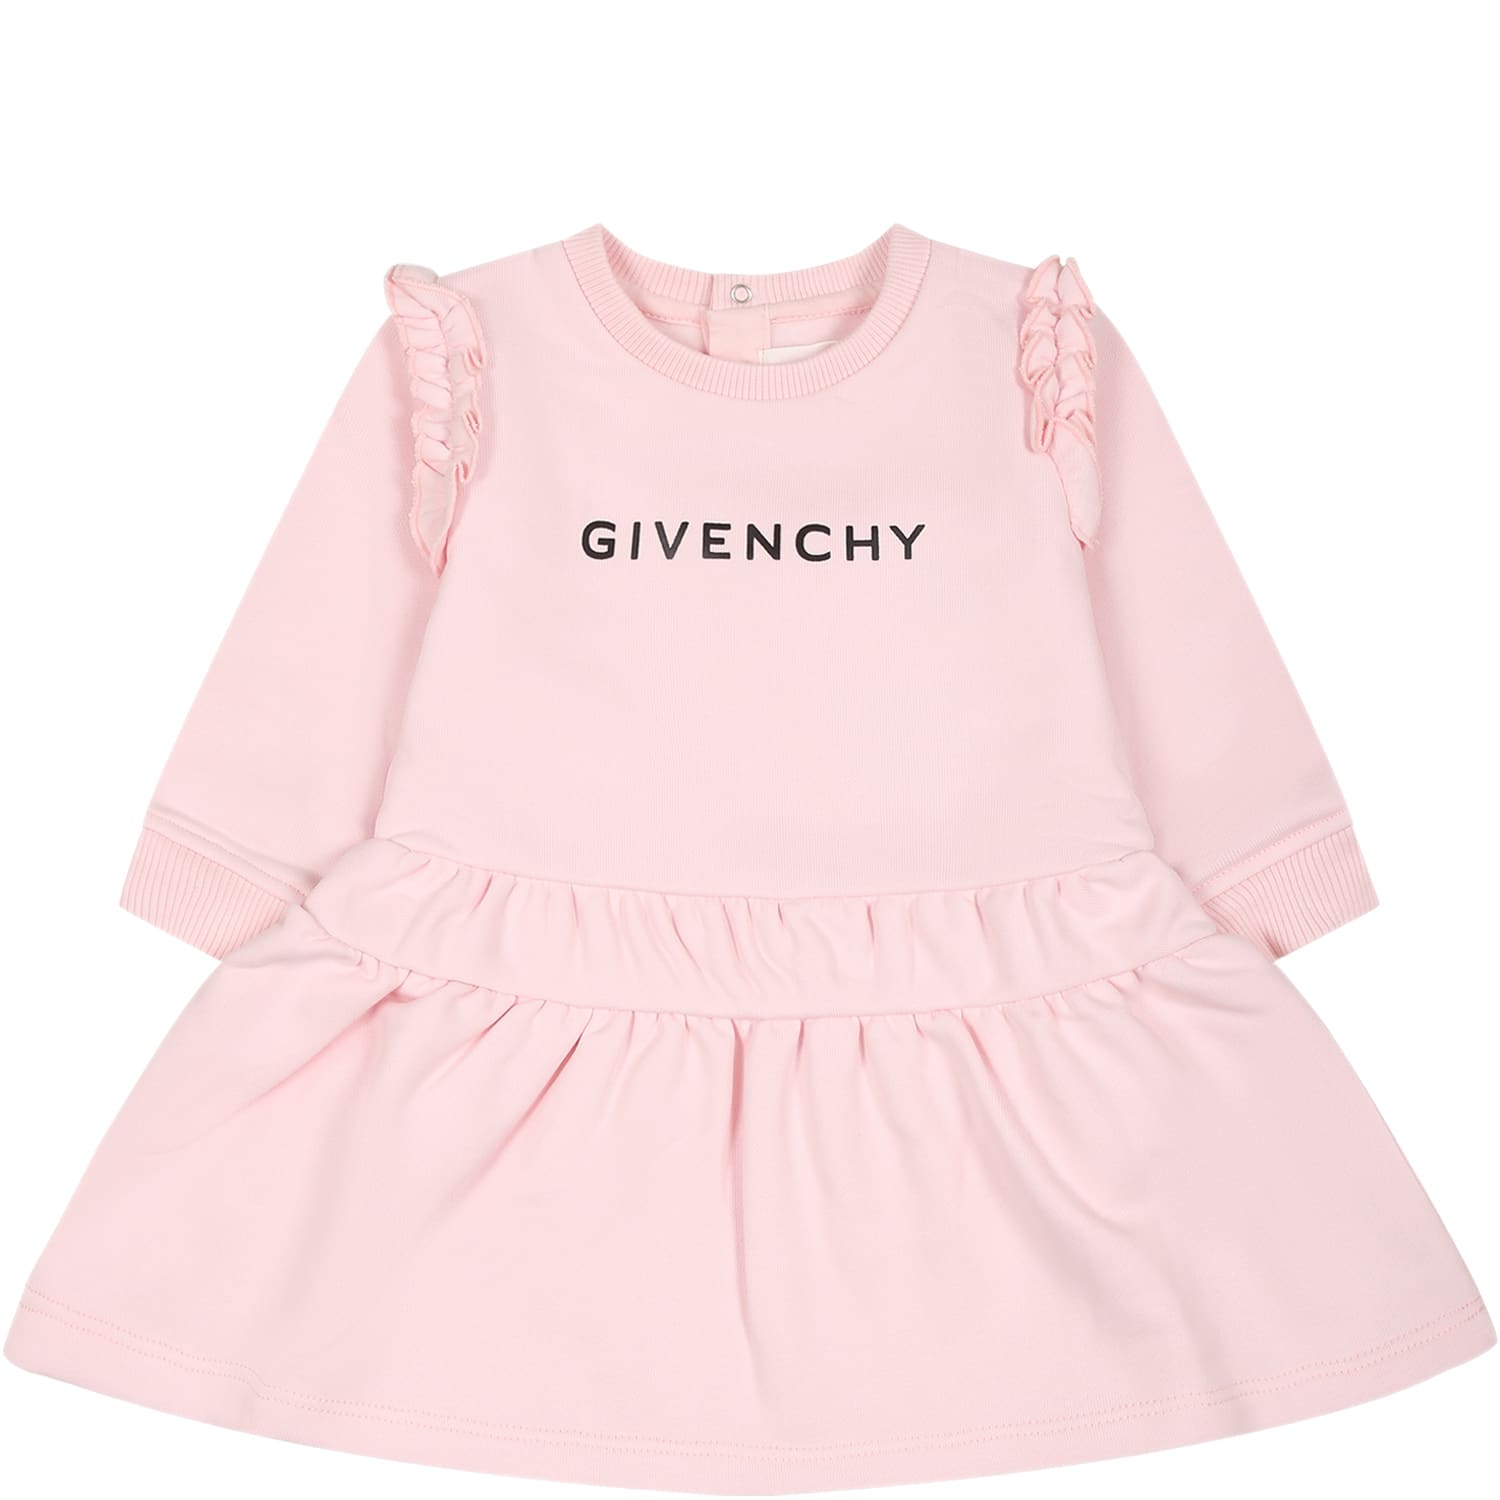 GIVENCHY PINK DRESS FOR BABY GIRL WITH LOGO